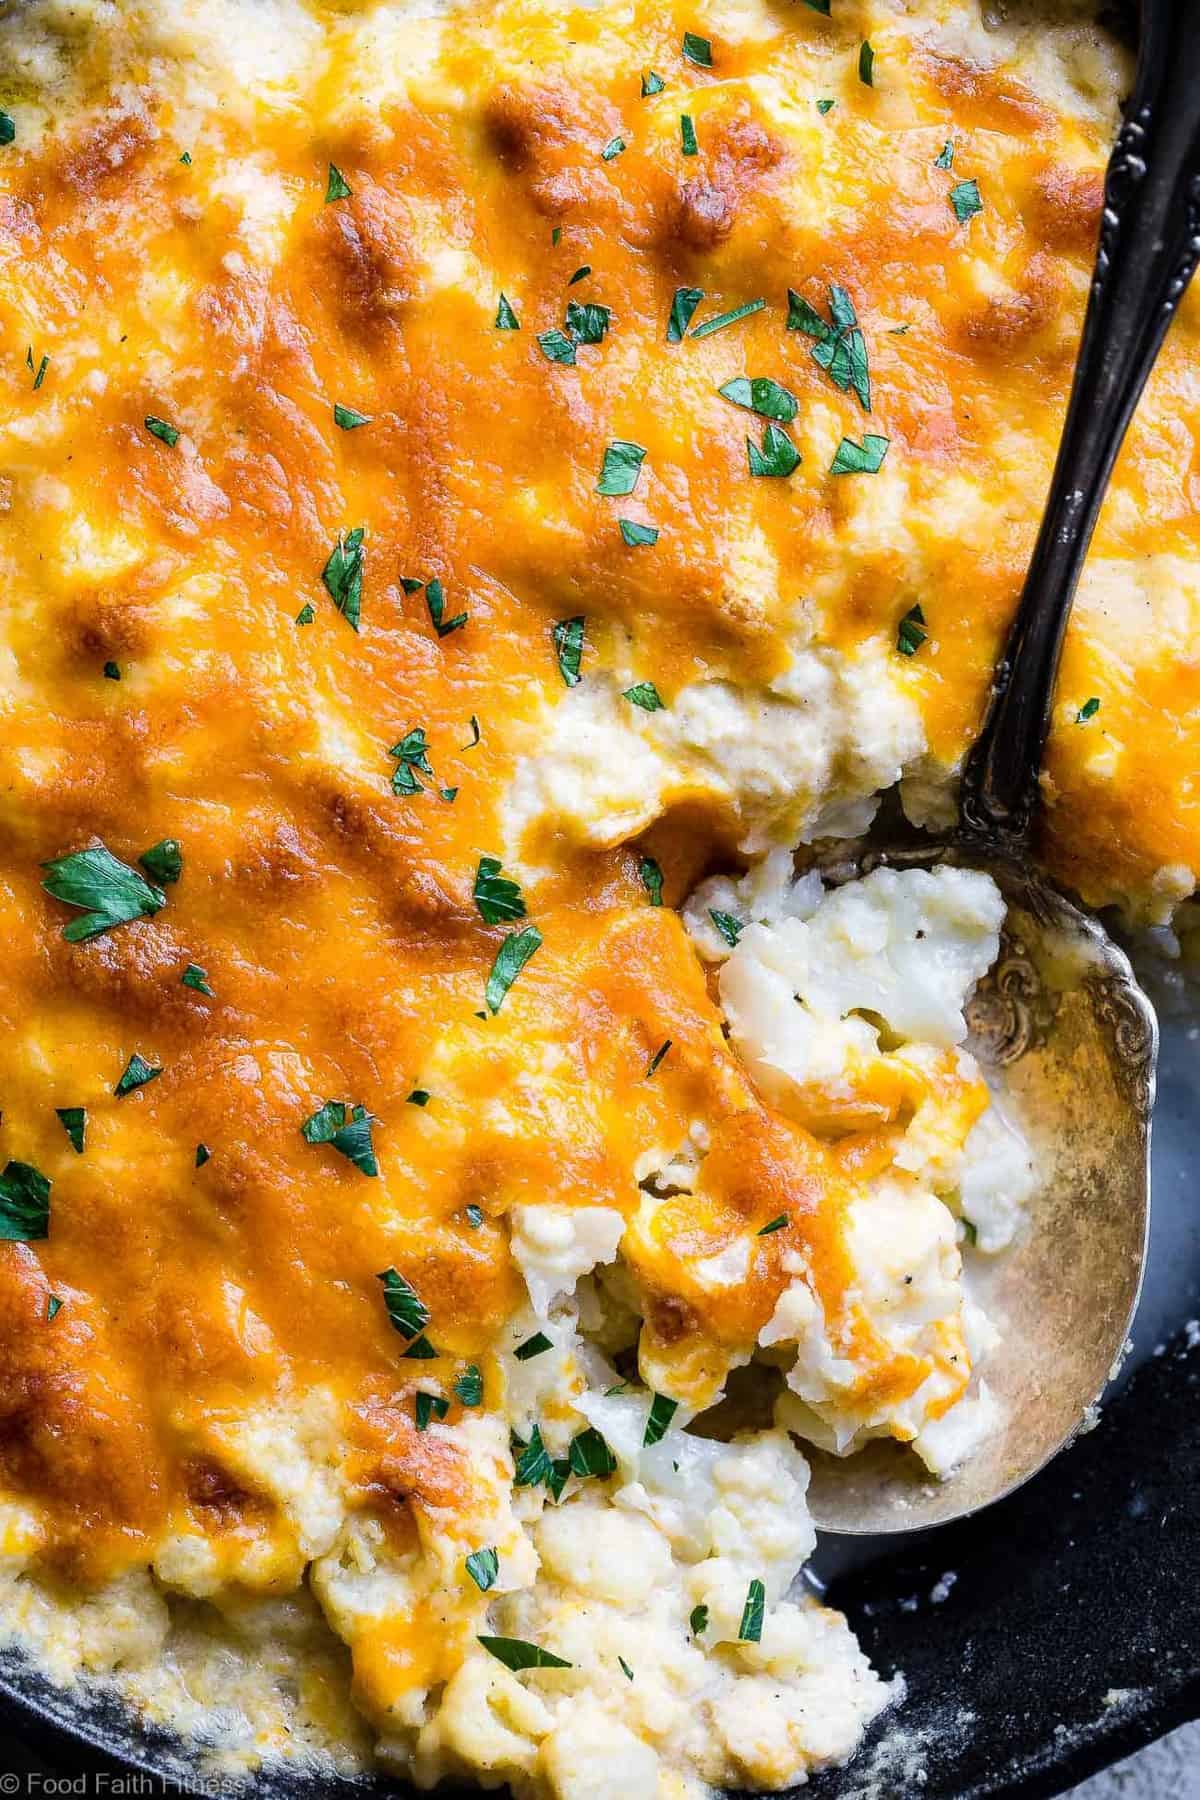 Keto Baked Cauliflower Au Gratin - This easy, healthy and keto friendly Low Carb Baked Cauliflower Gratin recipe is a gluten free, delicious side dish that even the pickiest of eaters will love! Only 6 ingredients and SO cheesy! | #Foodfaithfitness | #Keto #lowcarb #Glutenfree #Healthy #Grainfree